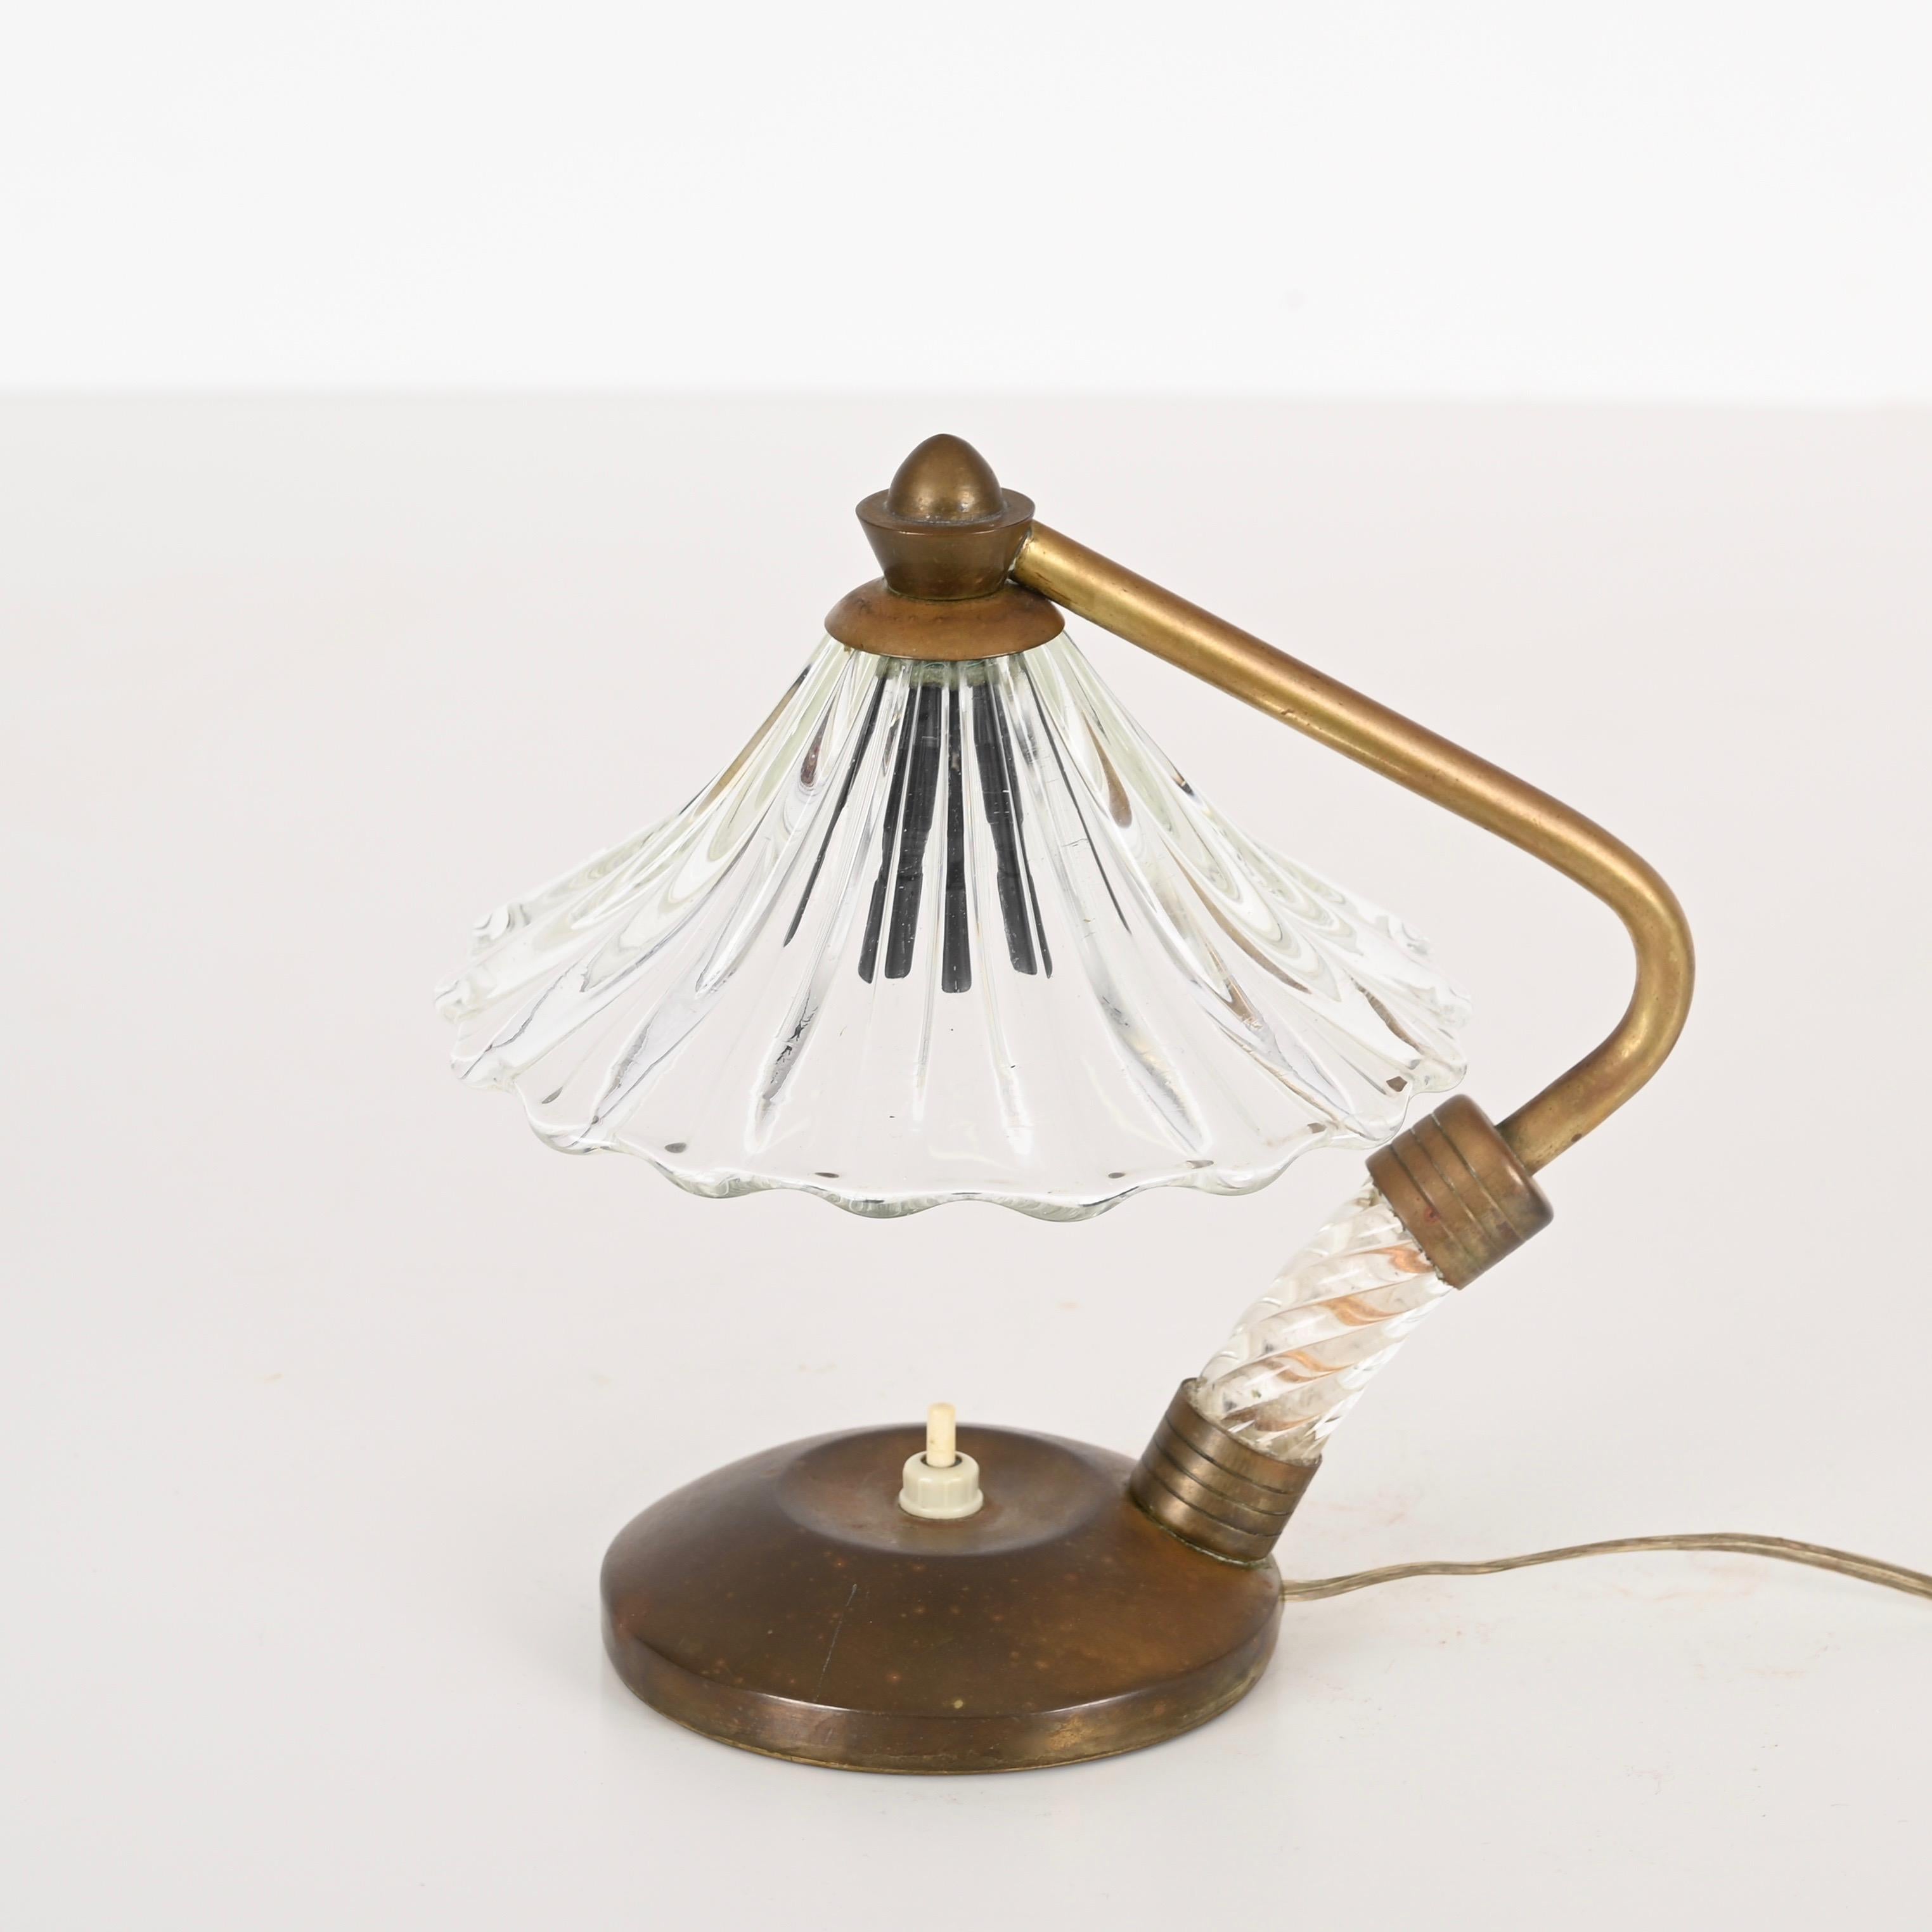 Hand-Crafted Bellflower Table Lamp in Murano Glass and Brass by Ercole Barovier, Italy 1940s For Sale